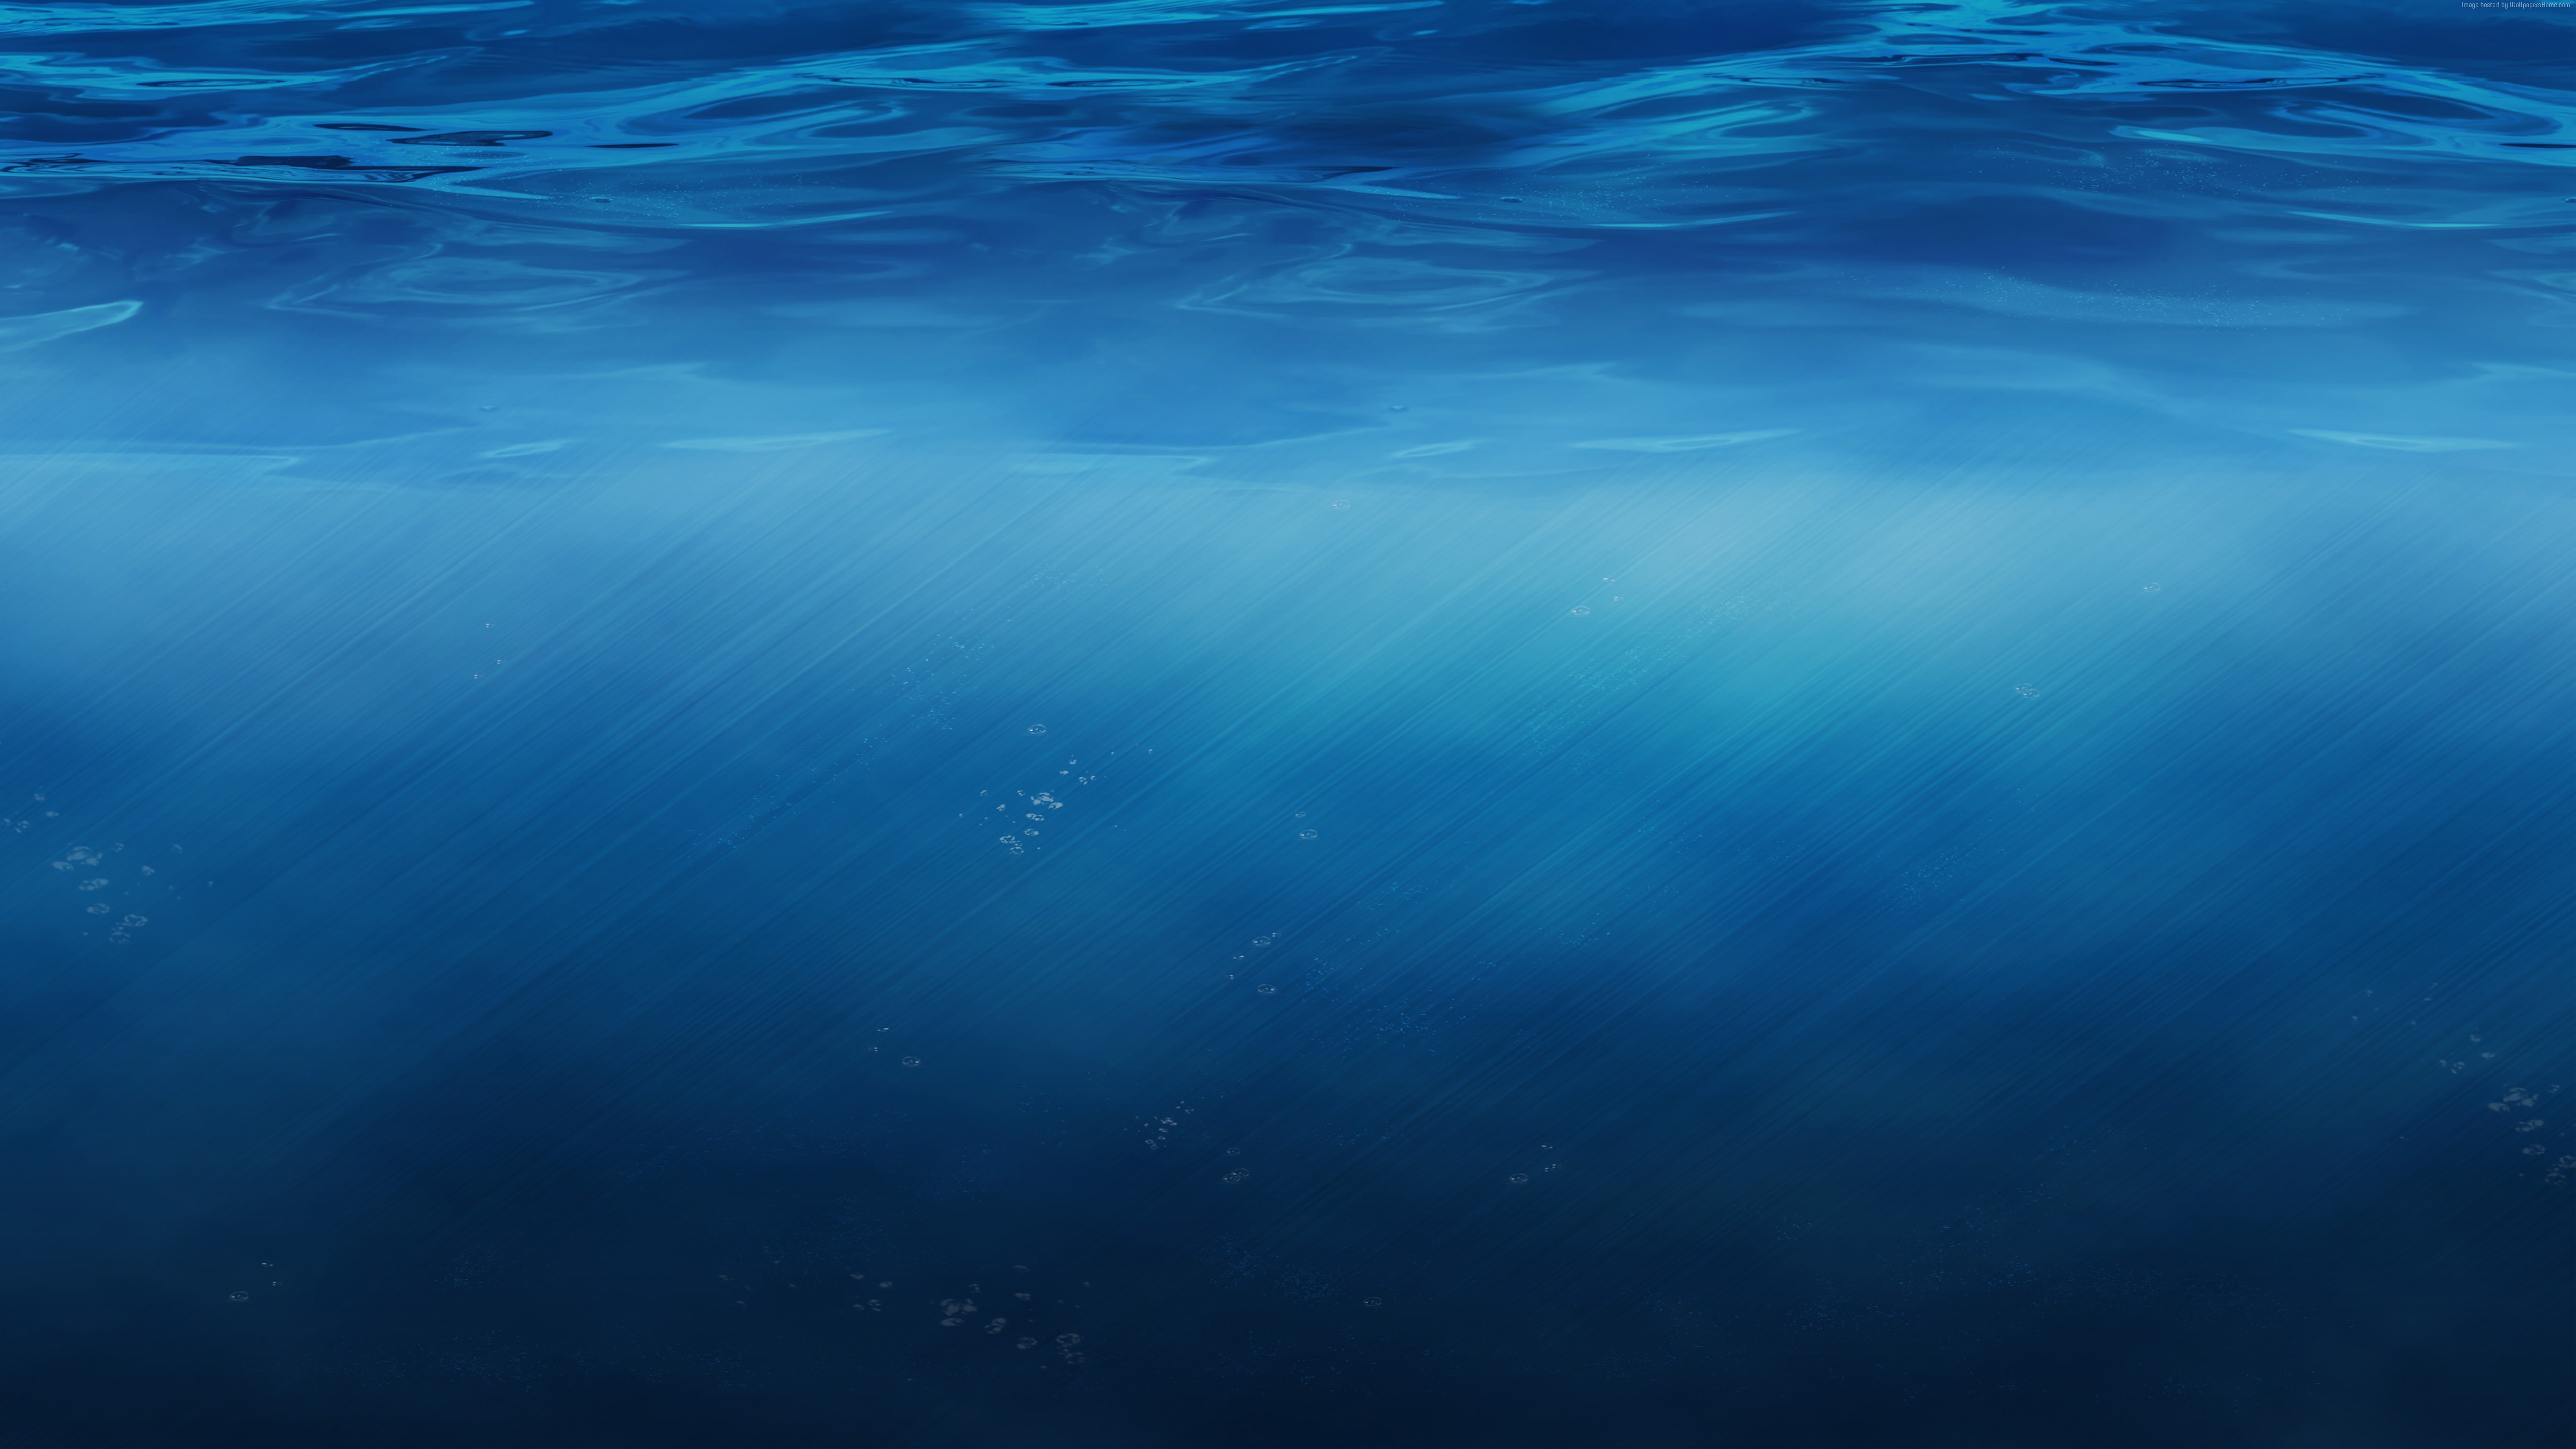 Earth Underwater HD Wallpaper | Background Image